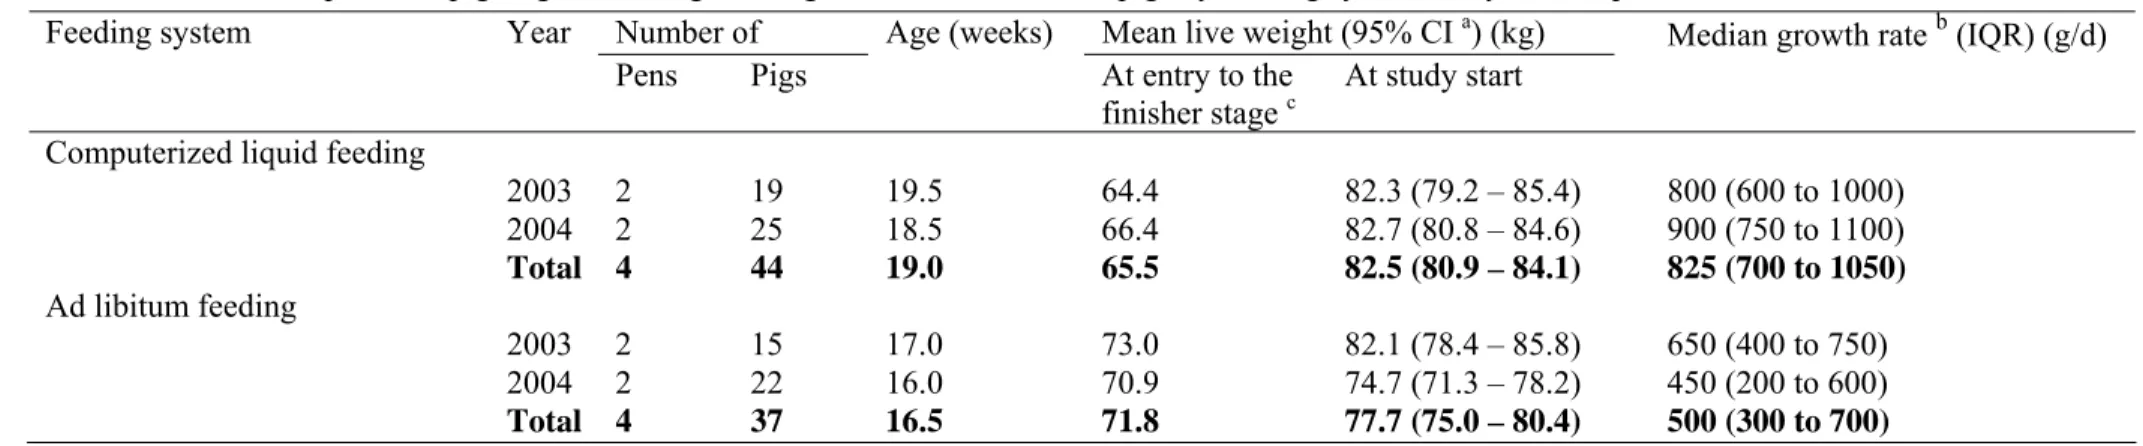 Table 4.1. Number of pens and pigs, age, live weight, and growth rate for finisher pigs by feeding system and year of replicate